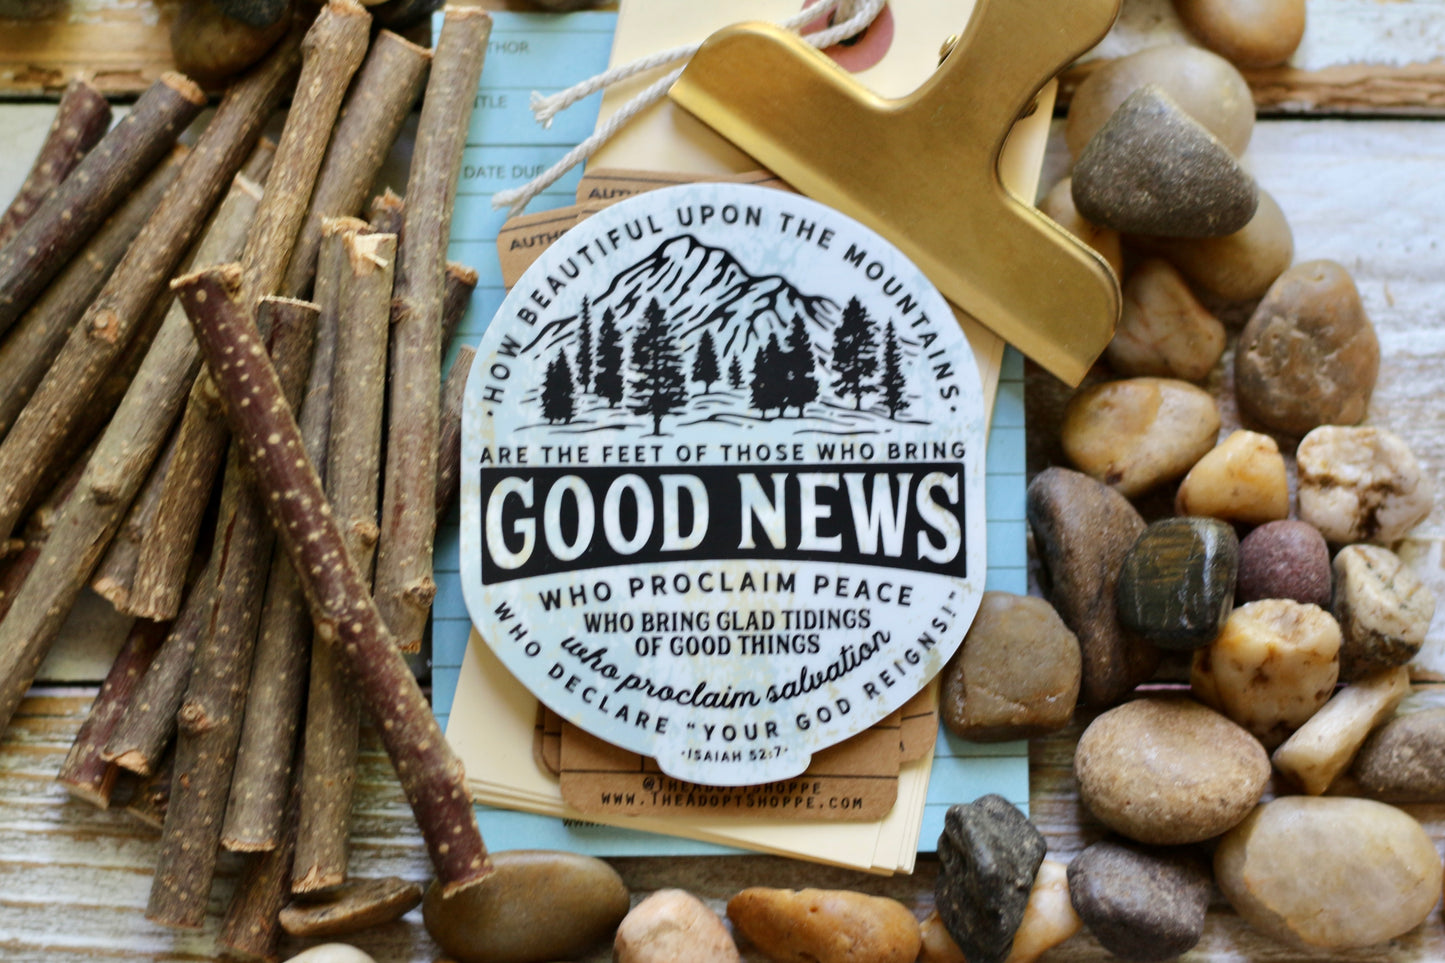 beautiful upon the mountains are the feet of those who bring good news mission (Isaiah 52:7) vinyl sticker